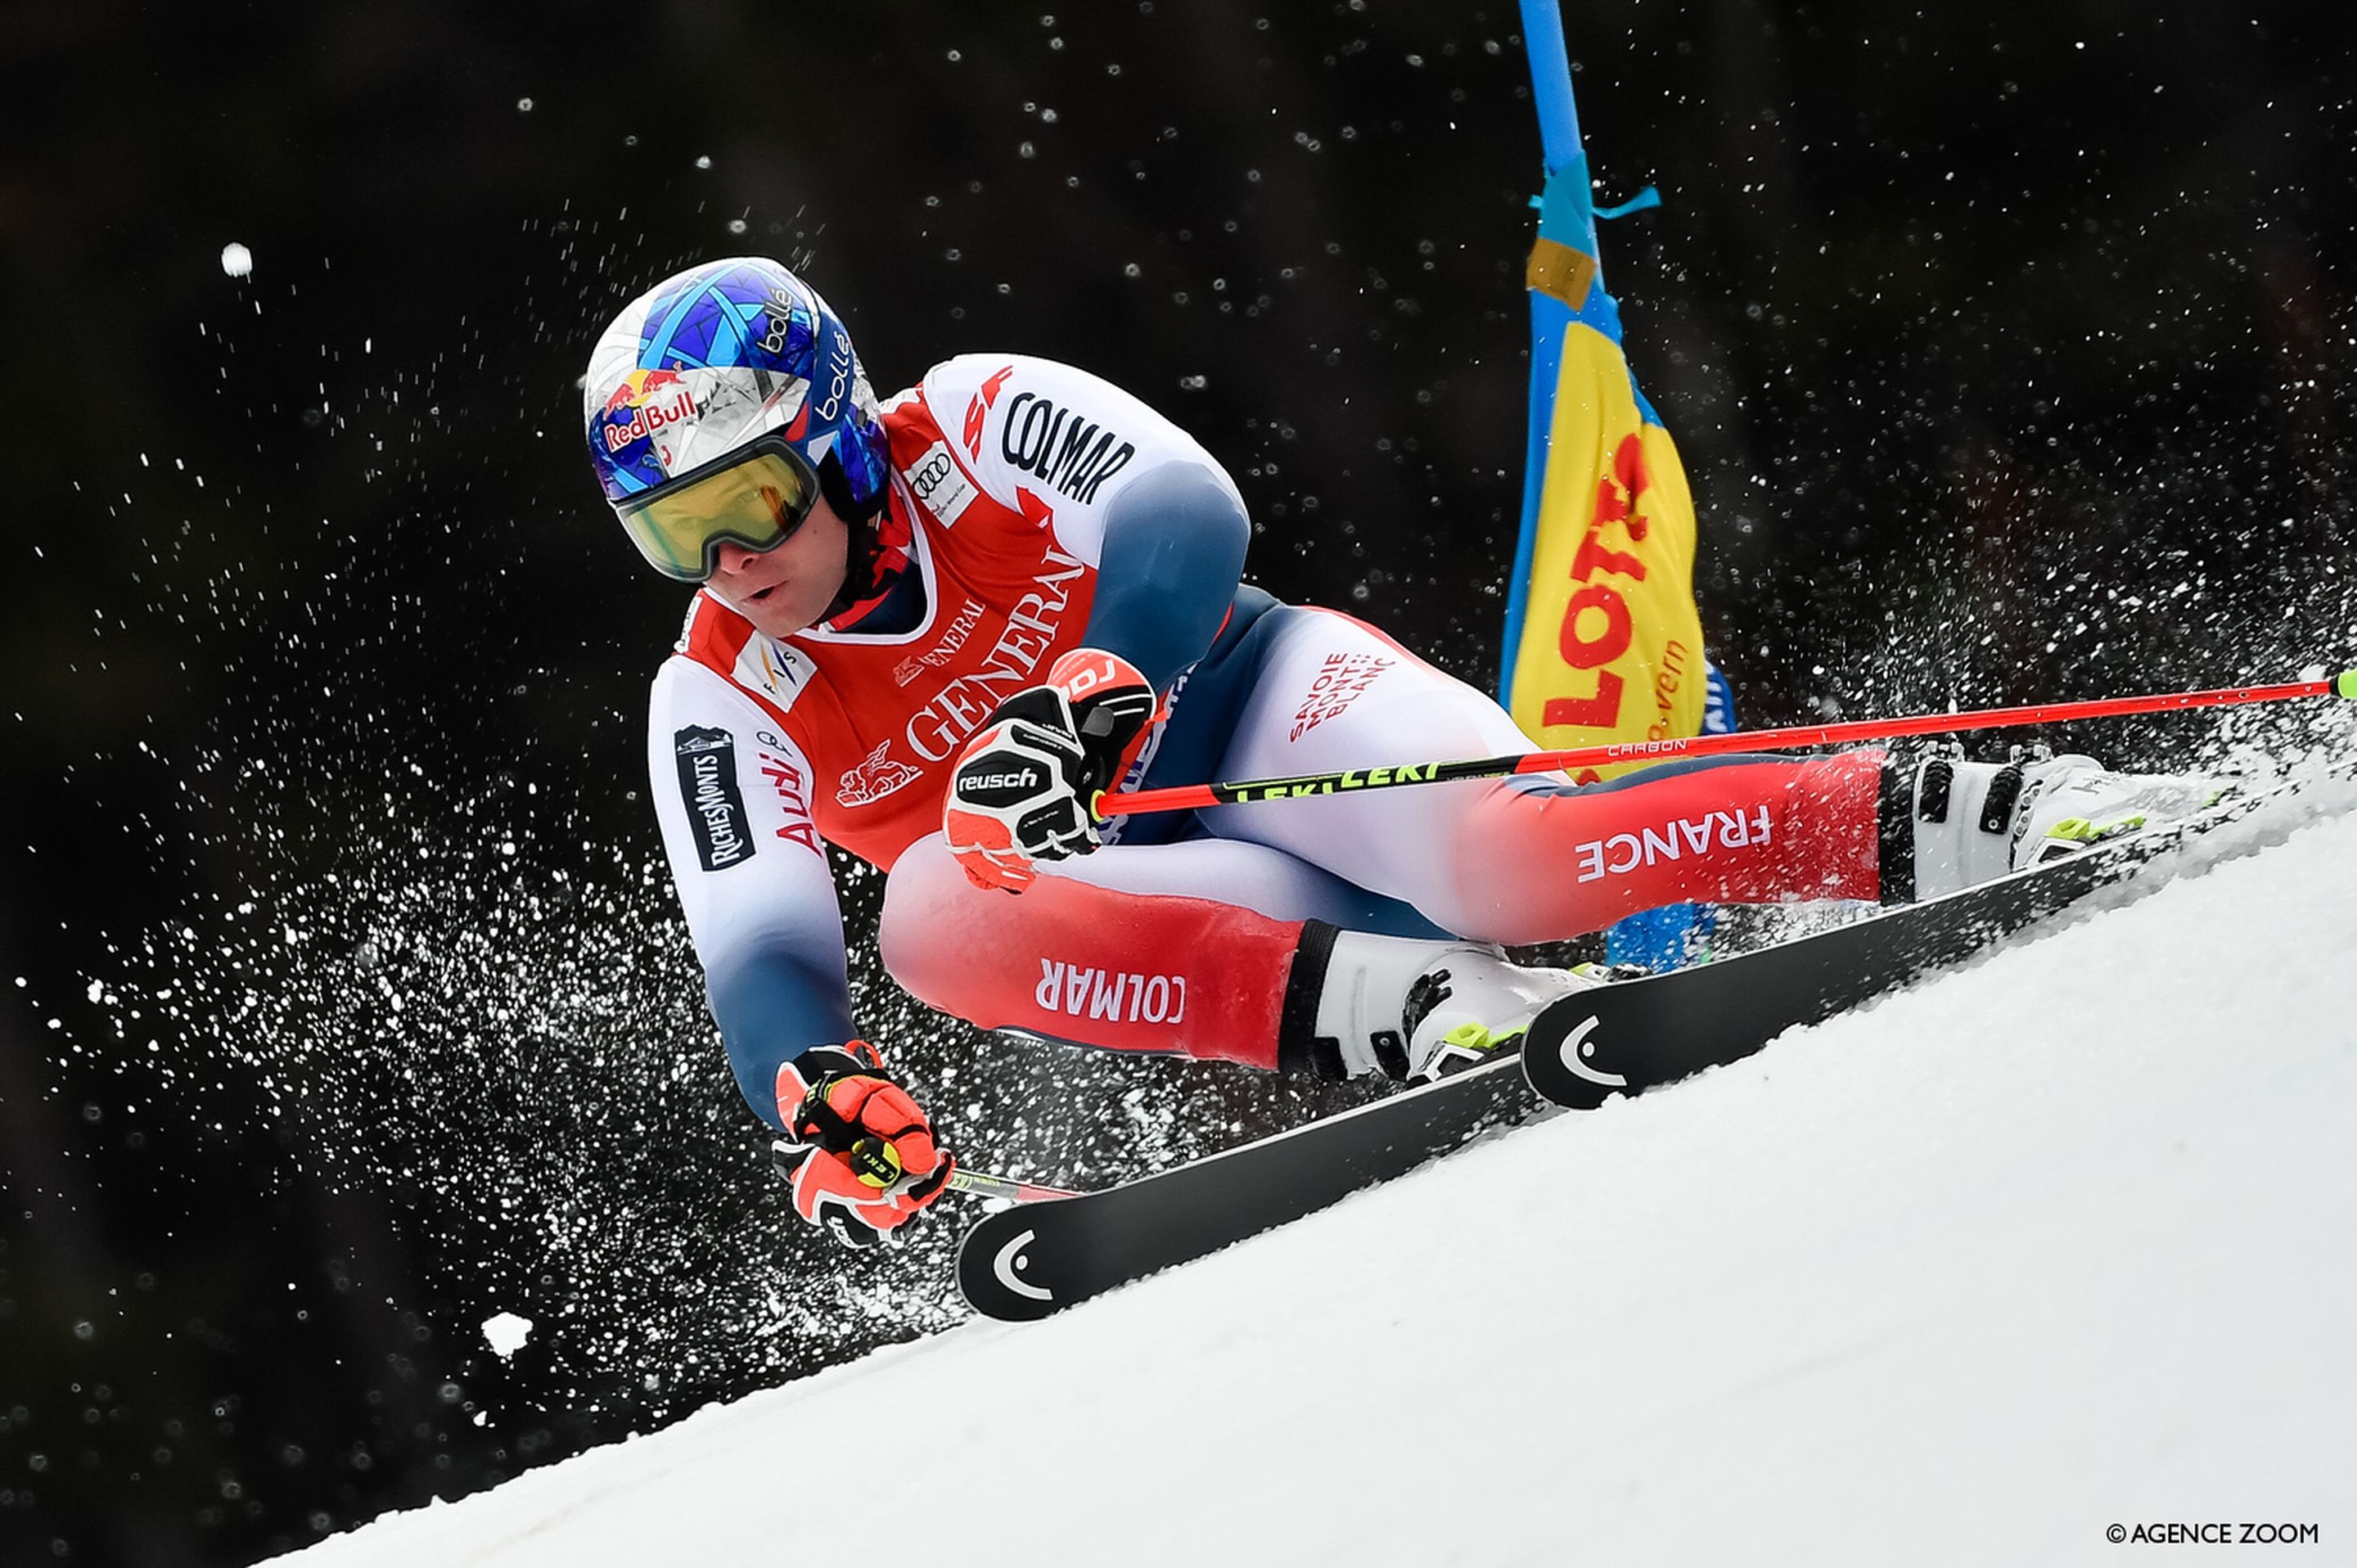 GARMISCH PARTENKIRCHEN, GERMANY - FEBRUARY 2: Alexis Pinturault of France competes during the Audi FIS Alpine Ski World Cup Men's Giant Slalom on February 2, 2020 in Garmisch Partenkirchen, Germany. (Photo by Alain Grosclaude/Agence Zoom)